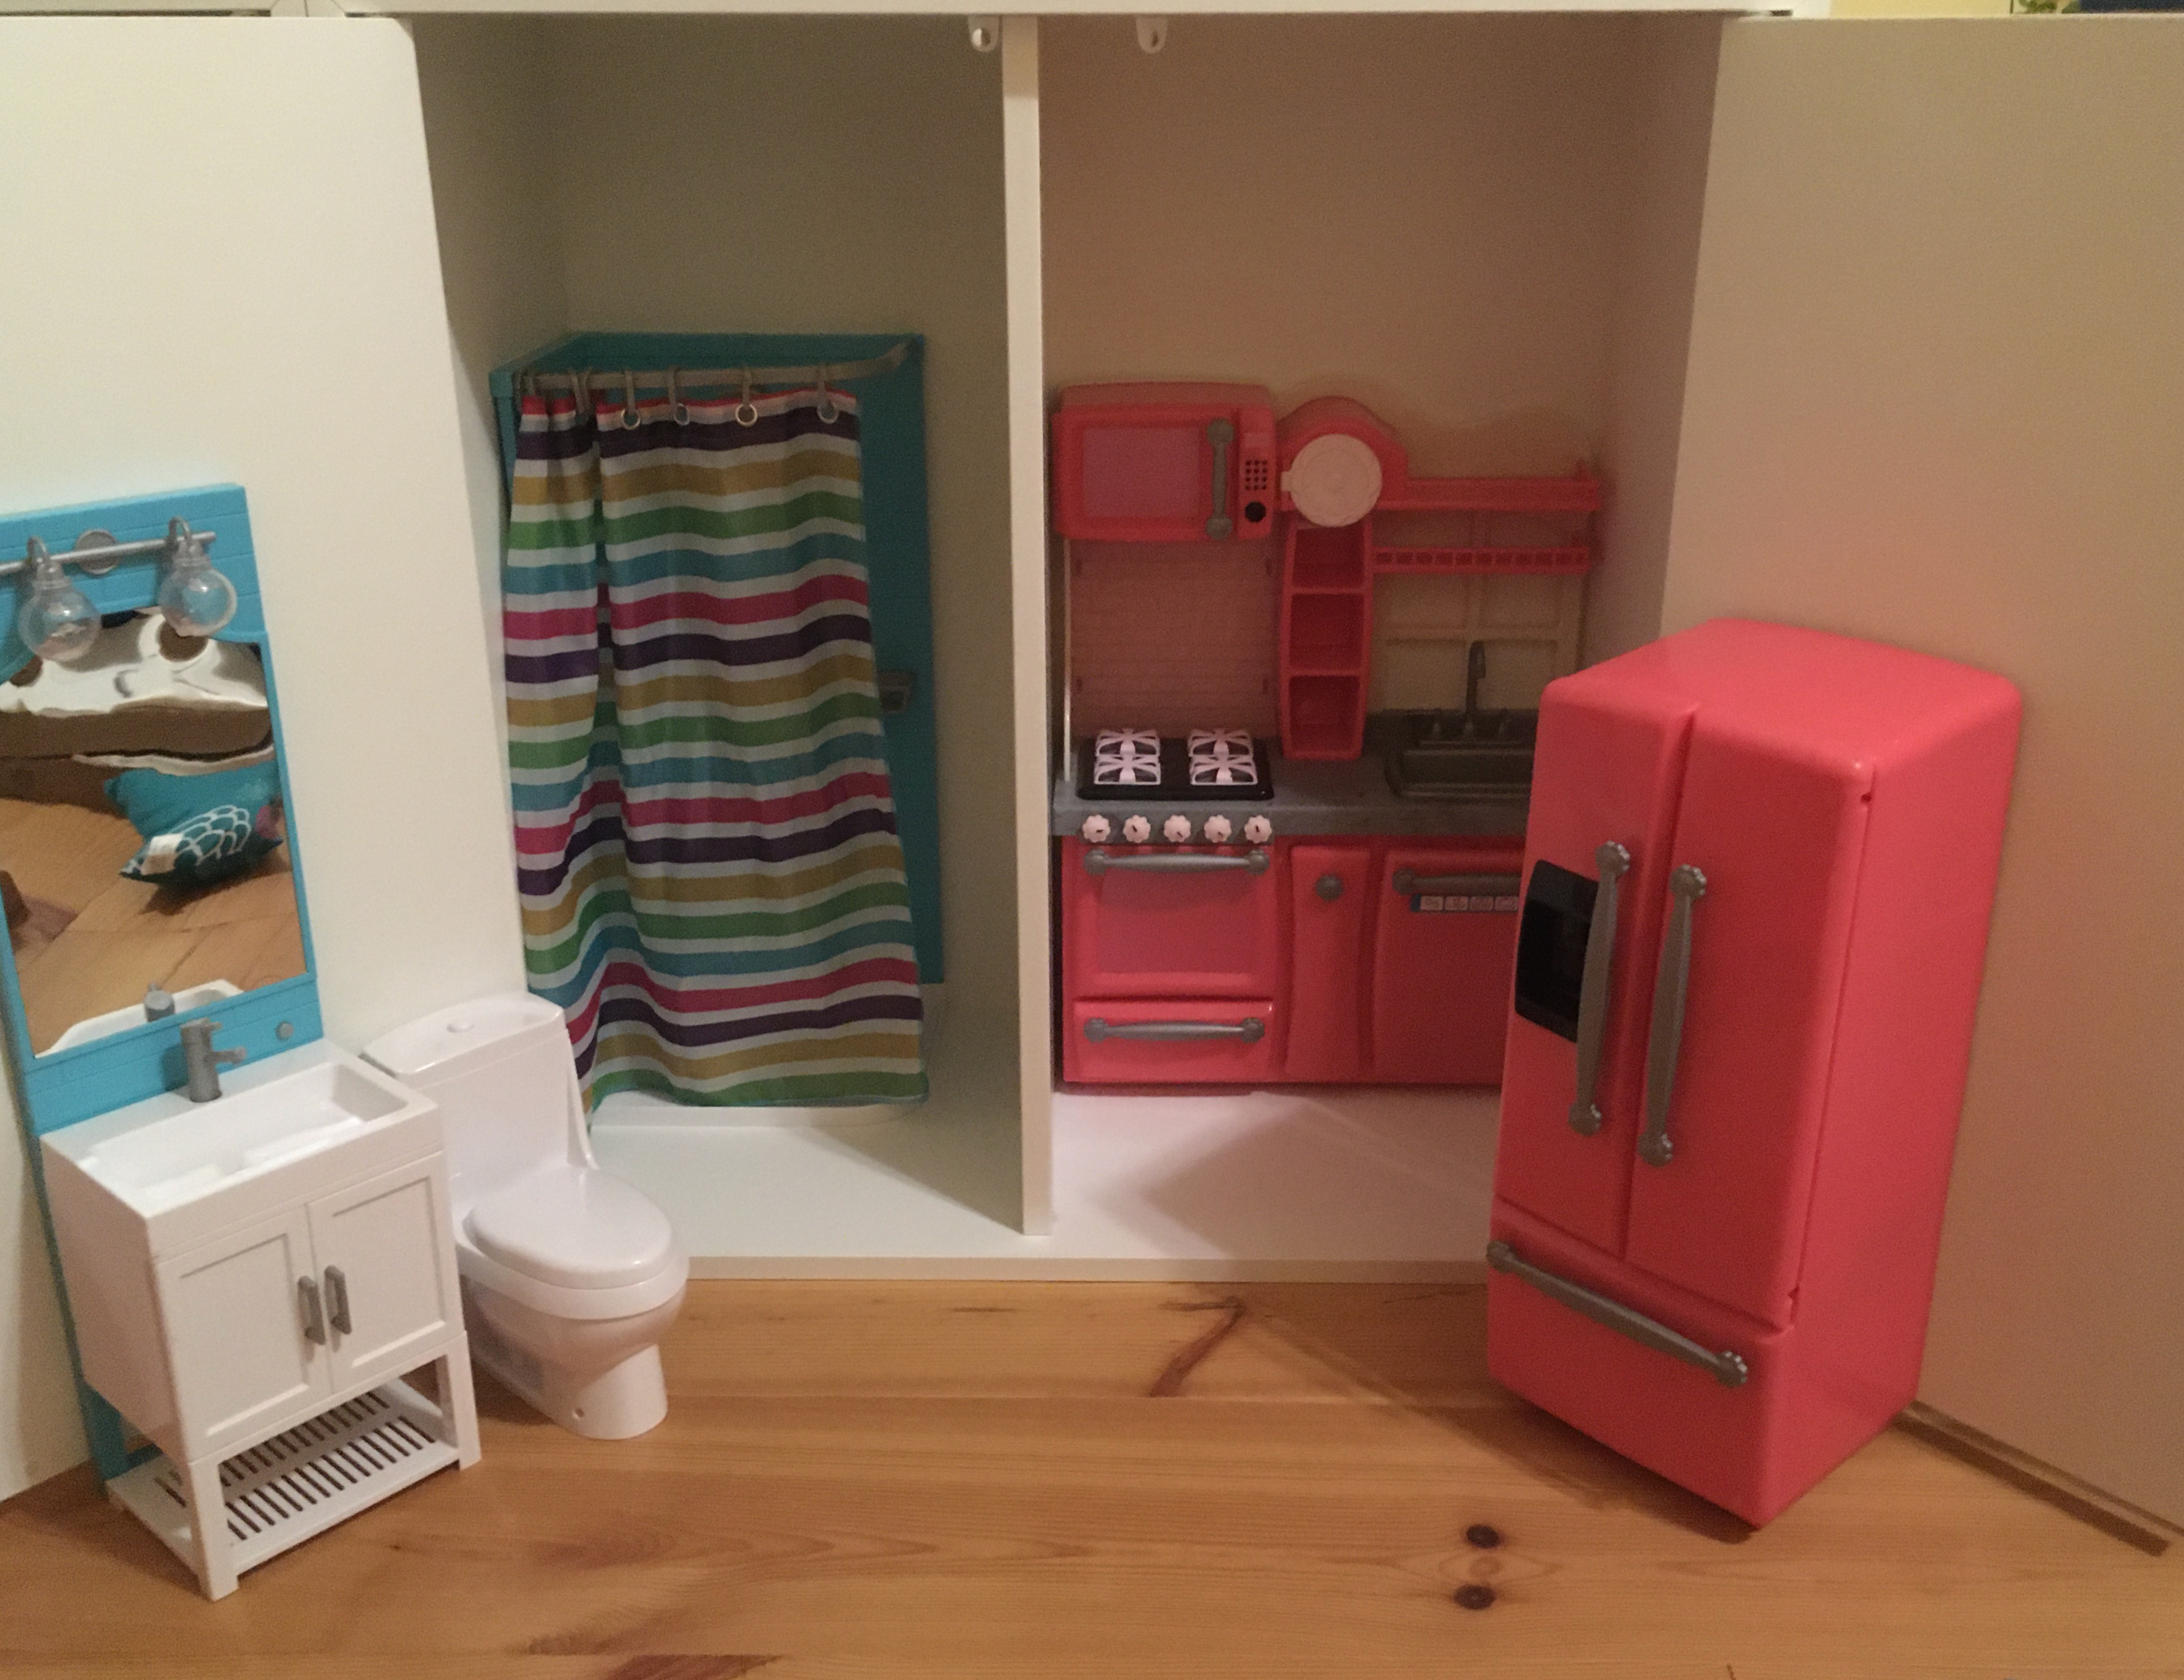 A square cupboard, open, with a doll kitchen in one half and a doll bathroom in the other. The two are separated by a vertical shelf.